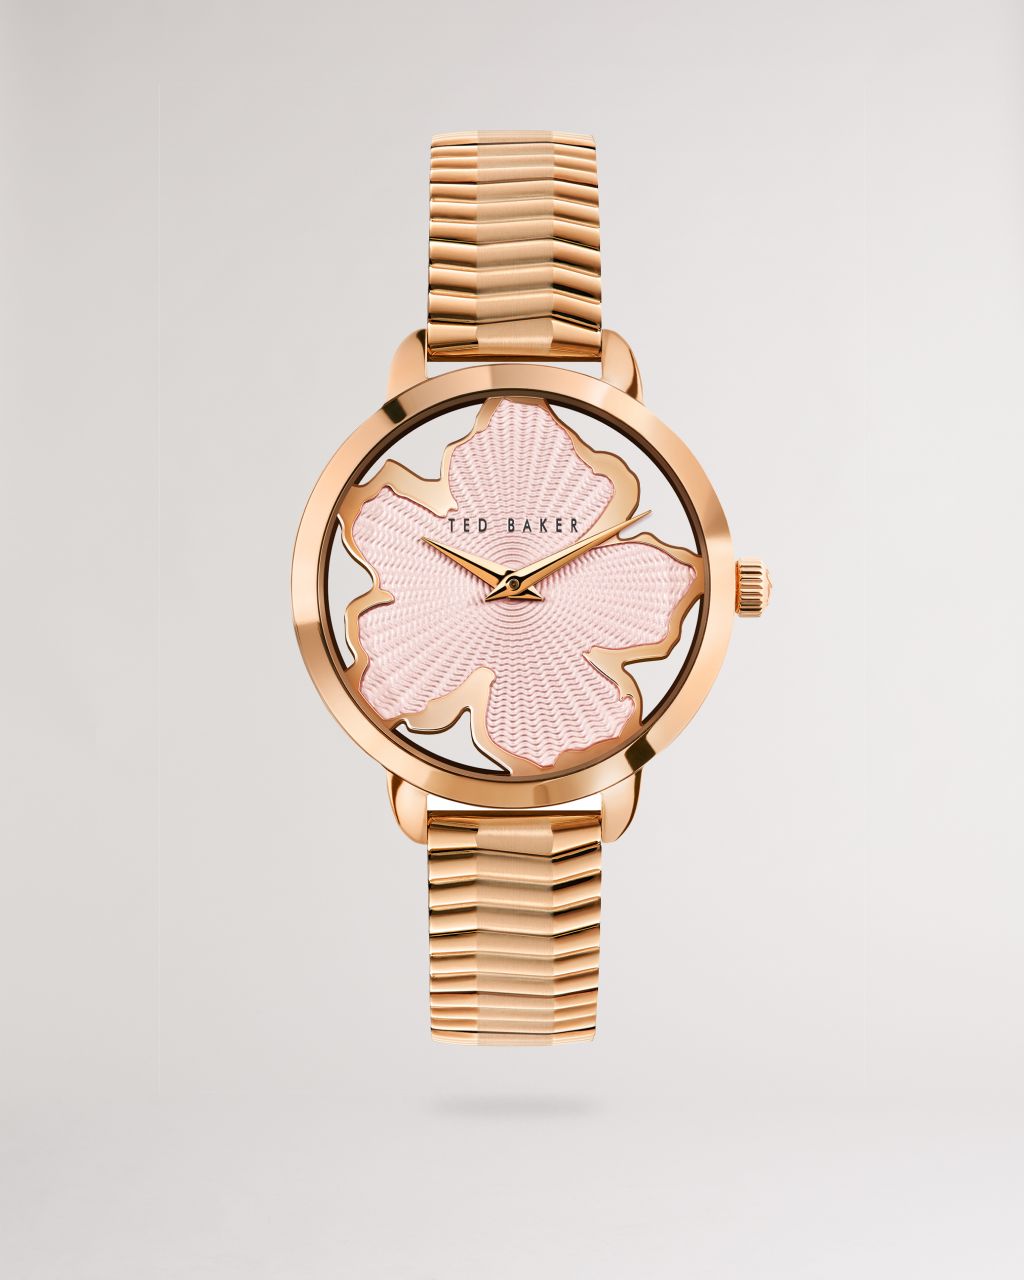 Ted Baker Women's Magnolia Dial Bracelet Watch in Rose Gold Color, Lilin